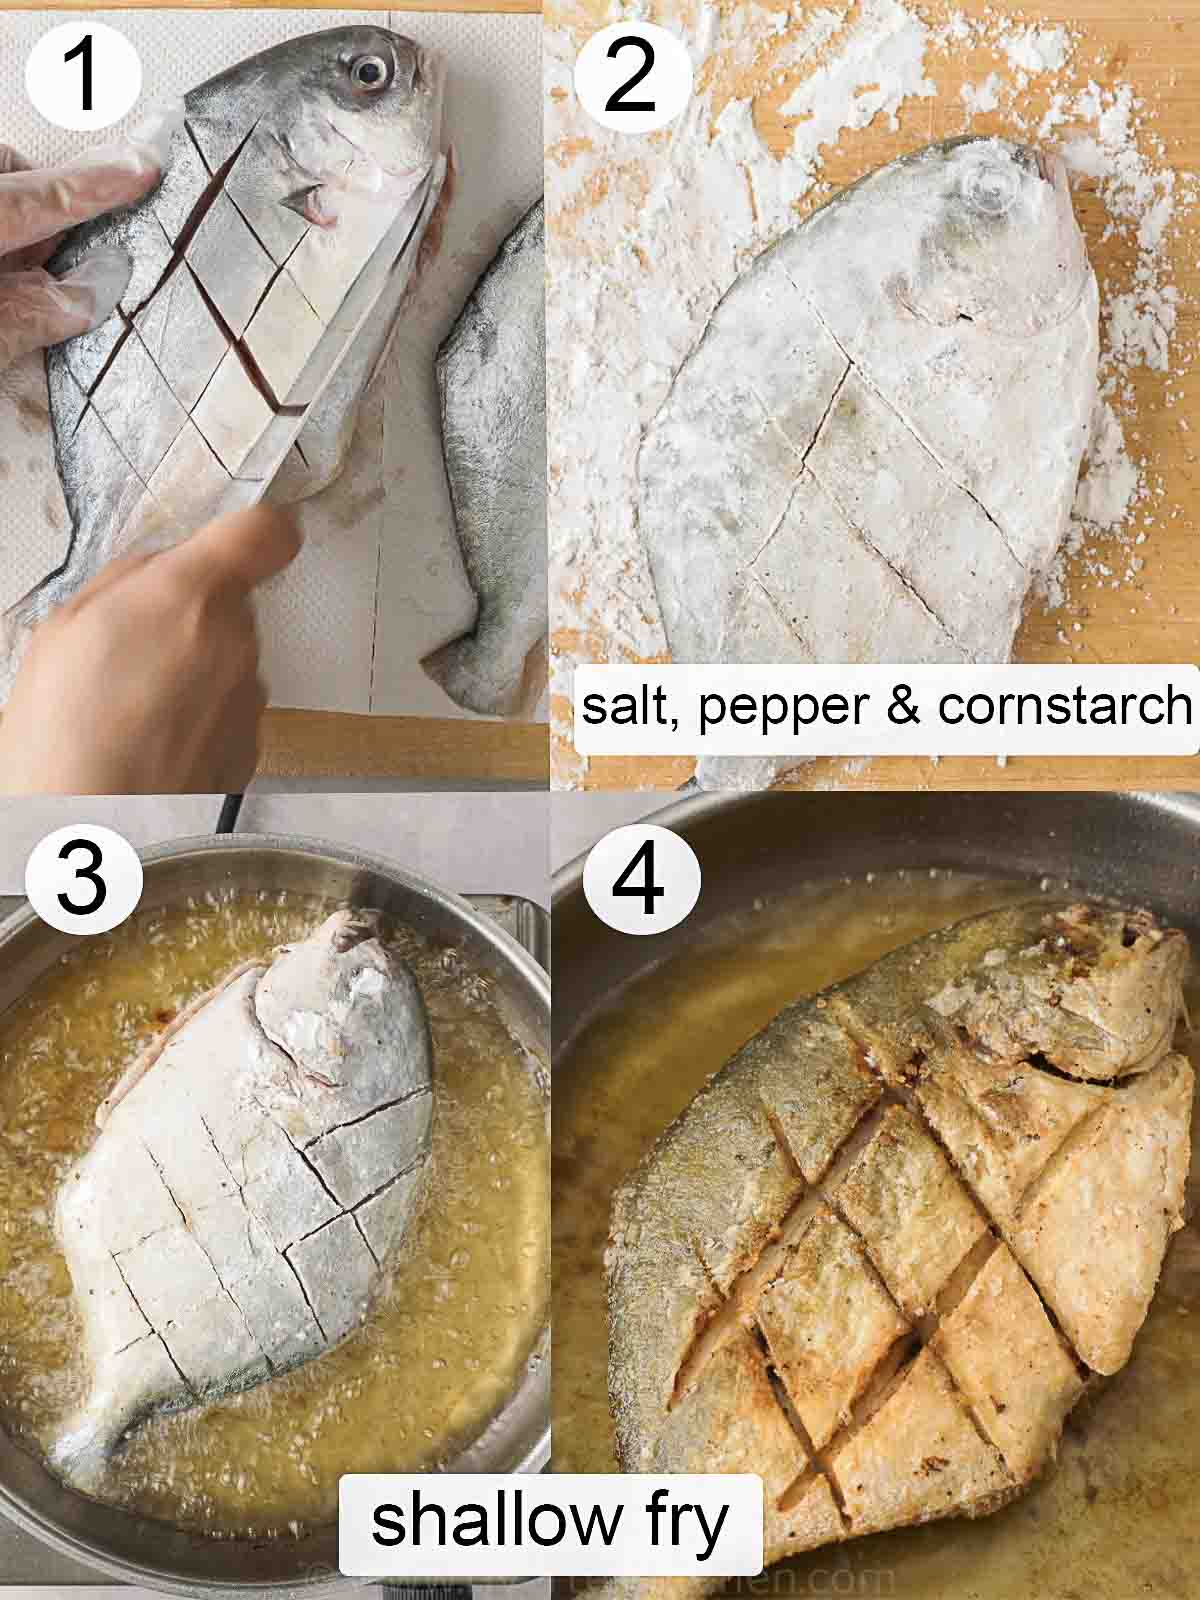 step-by-step process on how to fry whole fish.